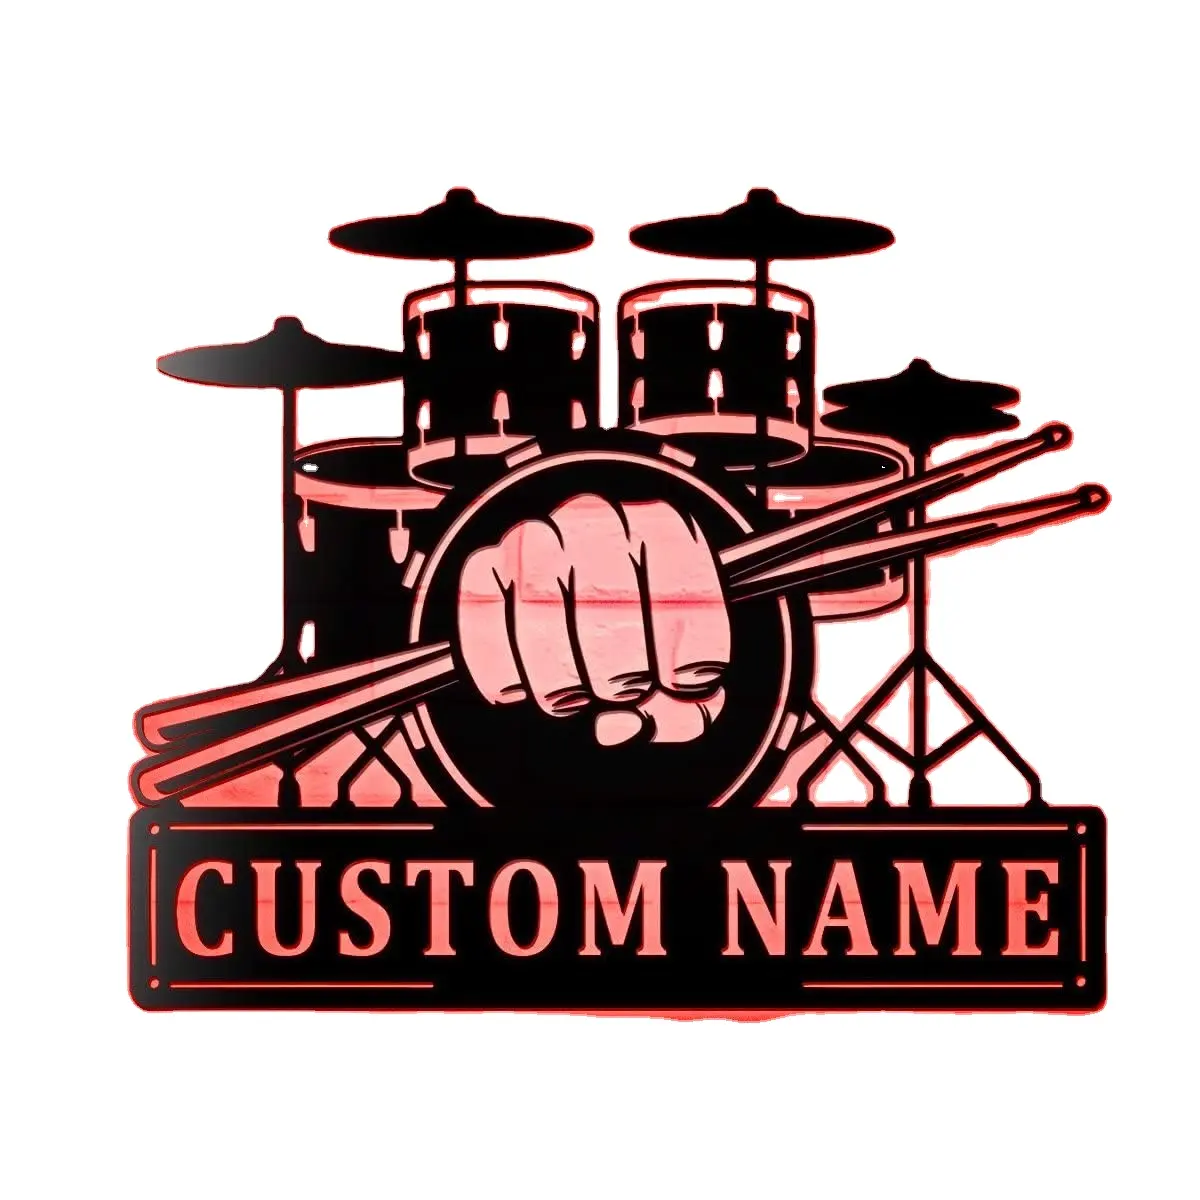 Custom Drum Set Music Monogram Metal Wall Decor With Led Lights, Personalized Drummer Name Wall Art Decoration